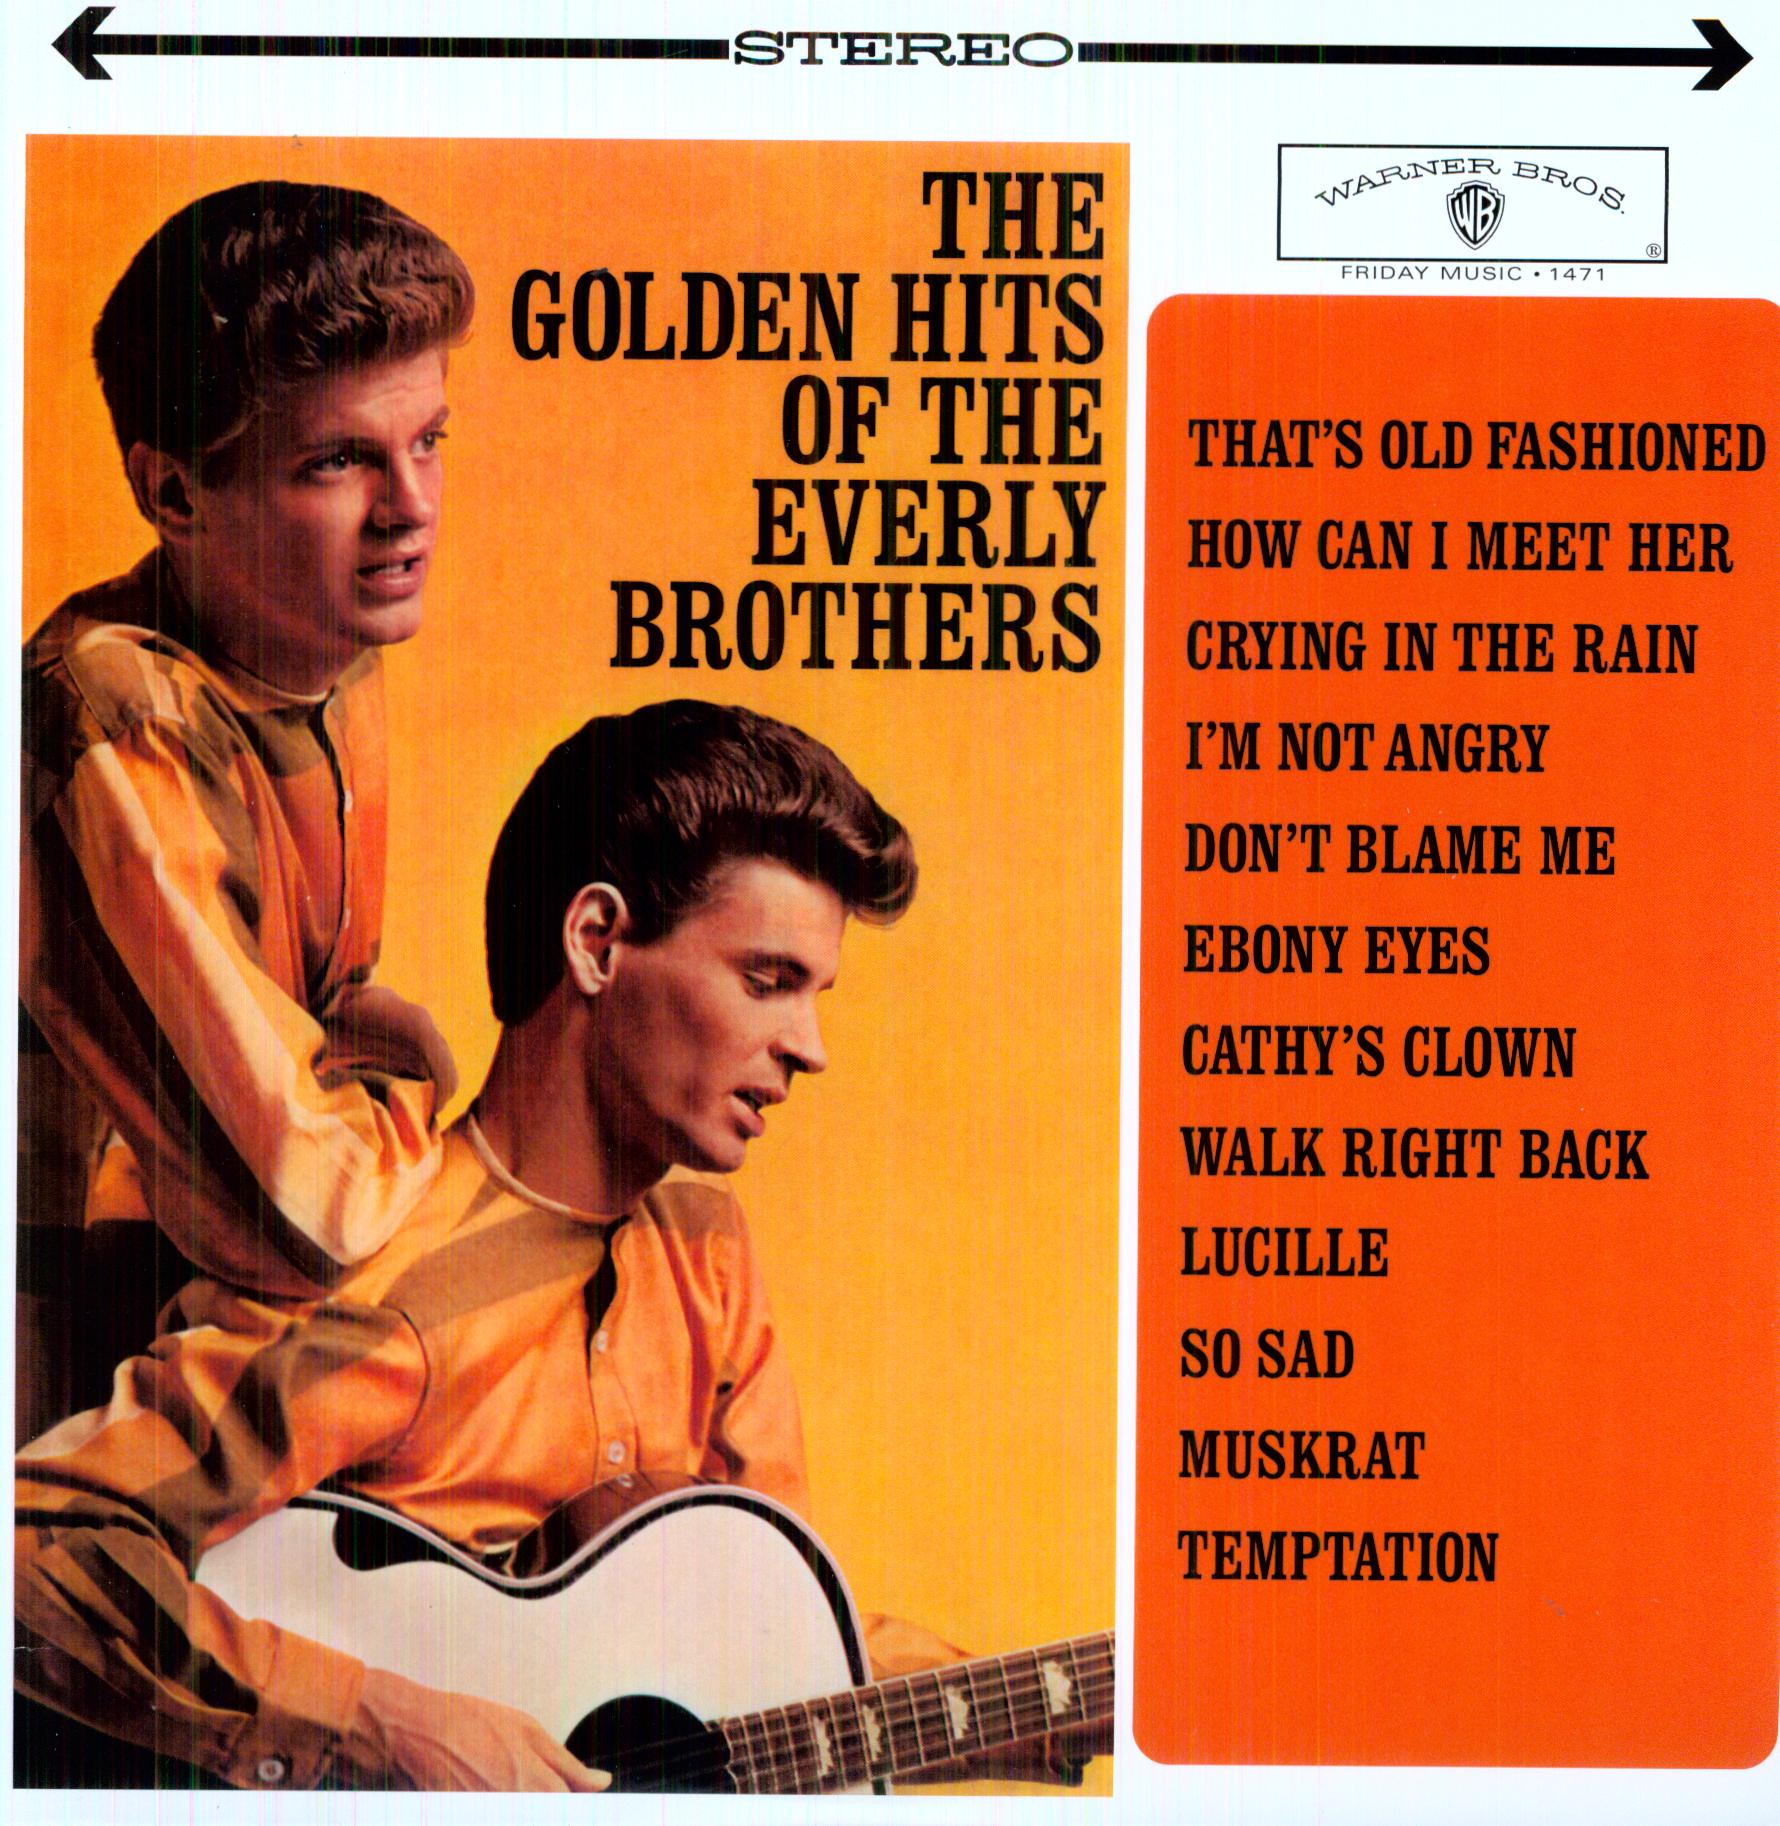 GOLDEN HITS OF THE EVERLY BROTHERS (LTD) (OGV)